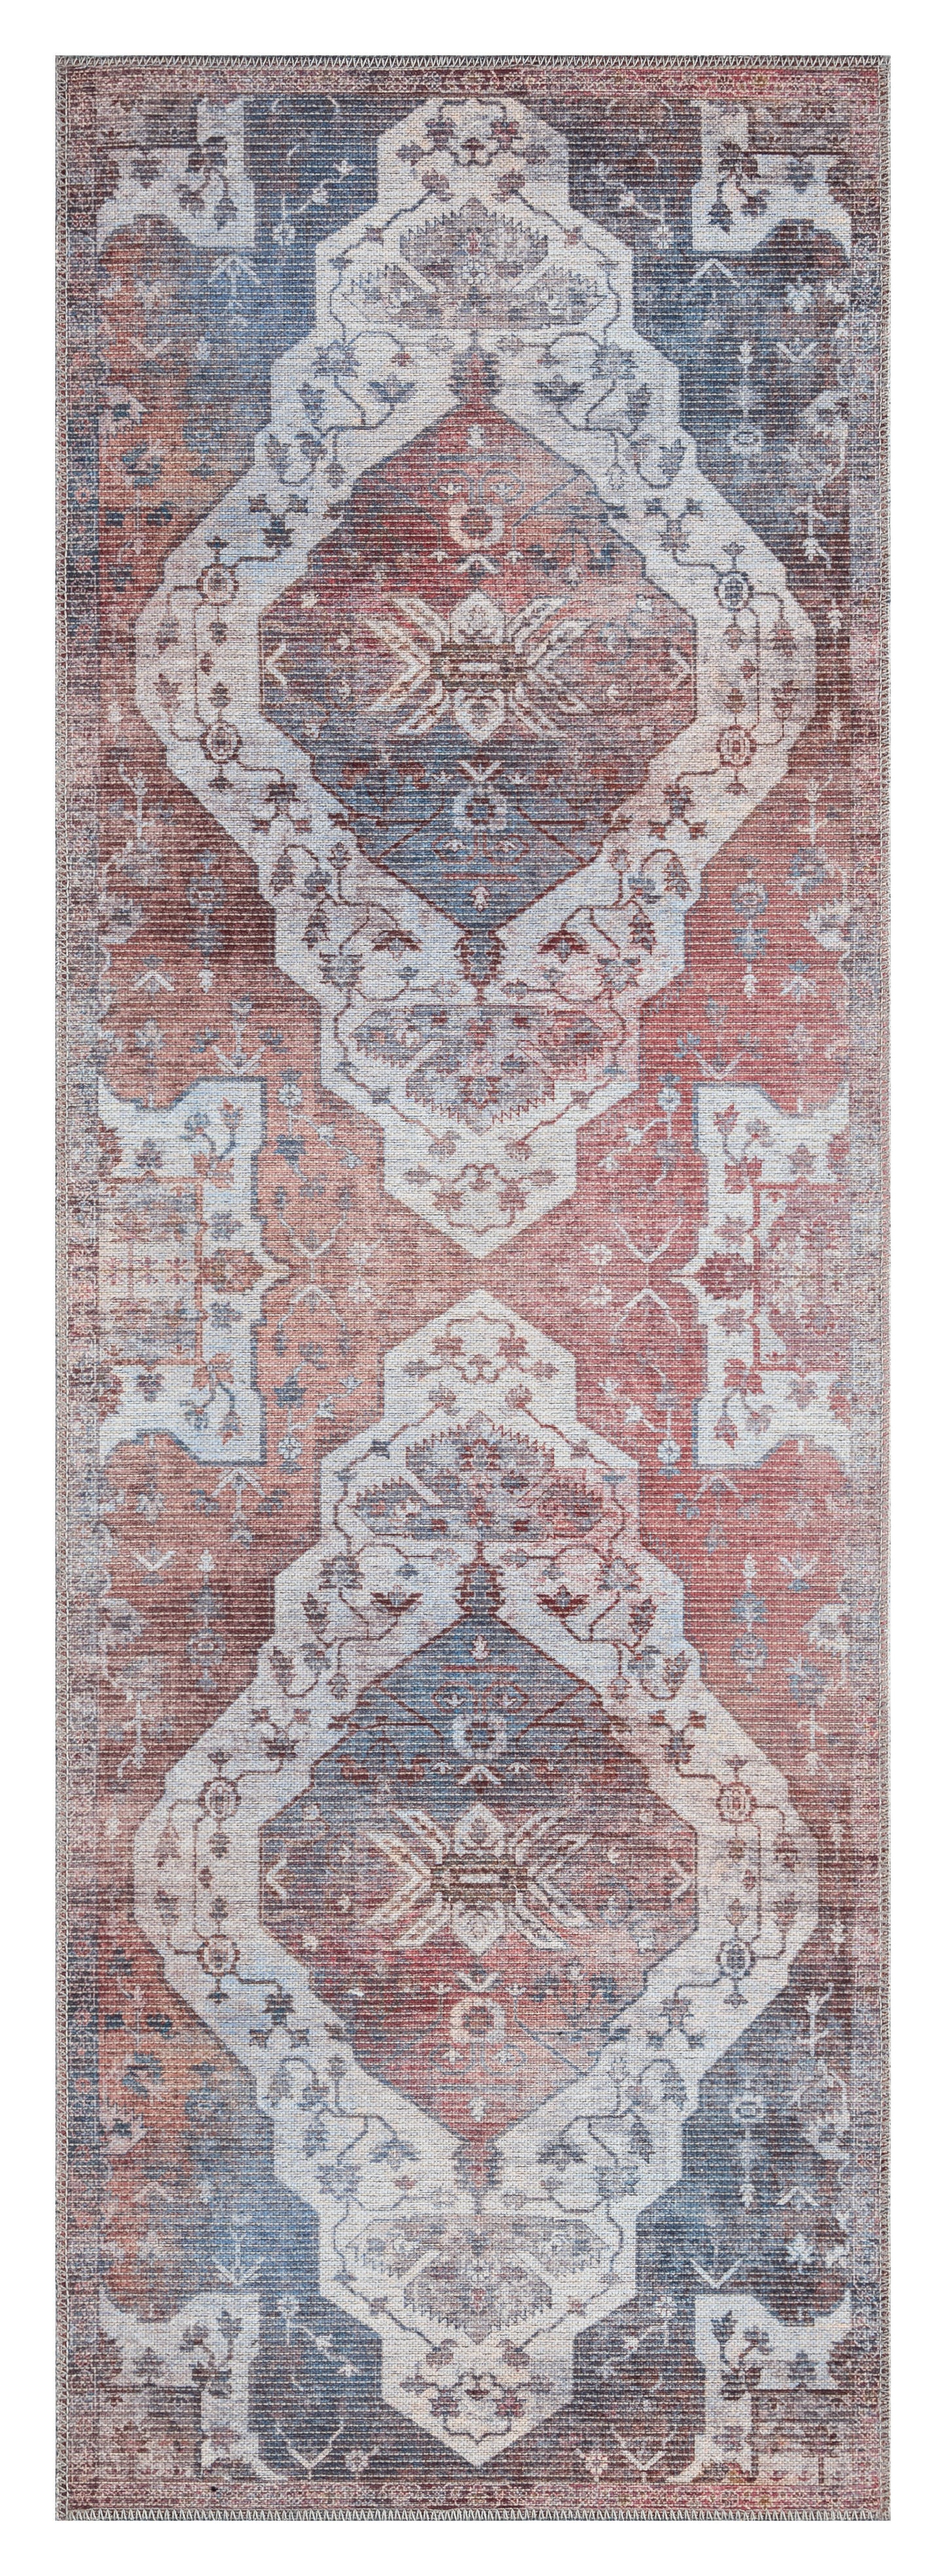 2700-Foretaste Synthetic Blend Indoor Area Rug by United Weavers